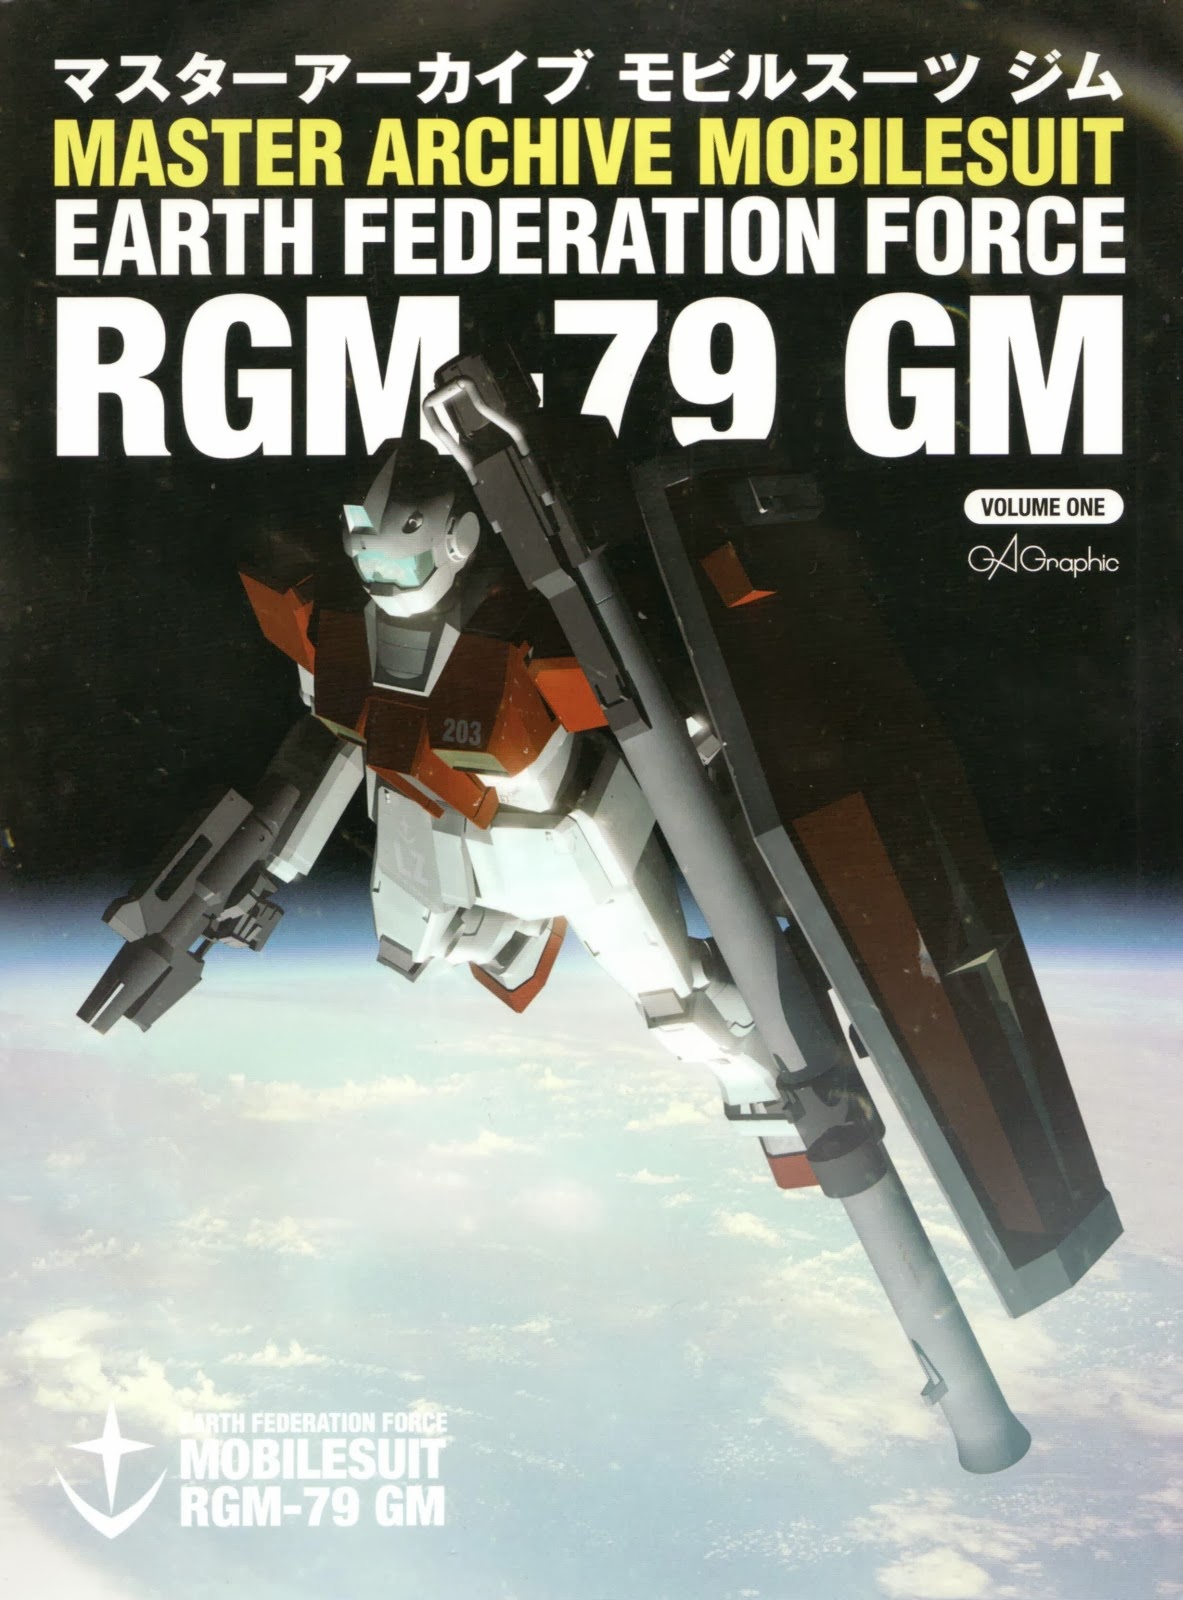 Mobile Suit Earth Federation.